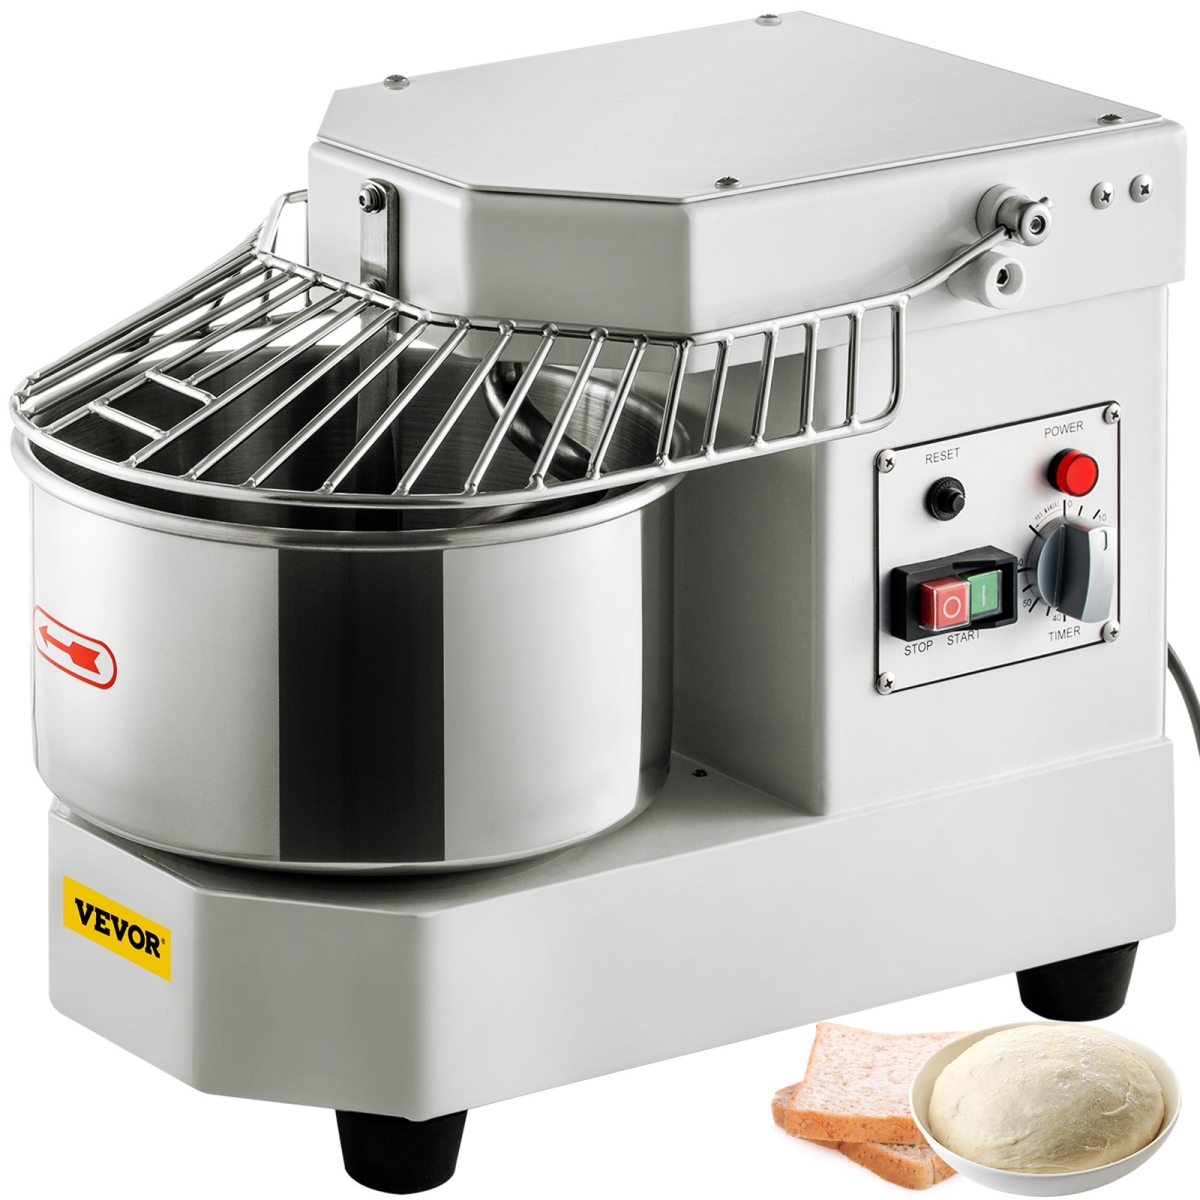 Picture of Vevor DGBMD8-8L110VTTM3V1 8.5 qt. 450W Commercial Food Mixer with Dual Rotating Dough Kneading Machine